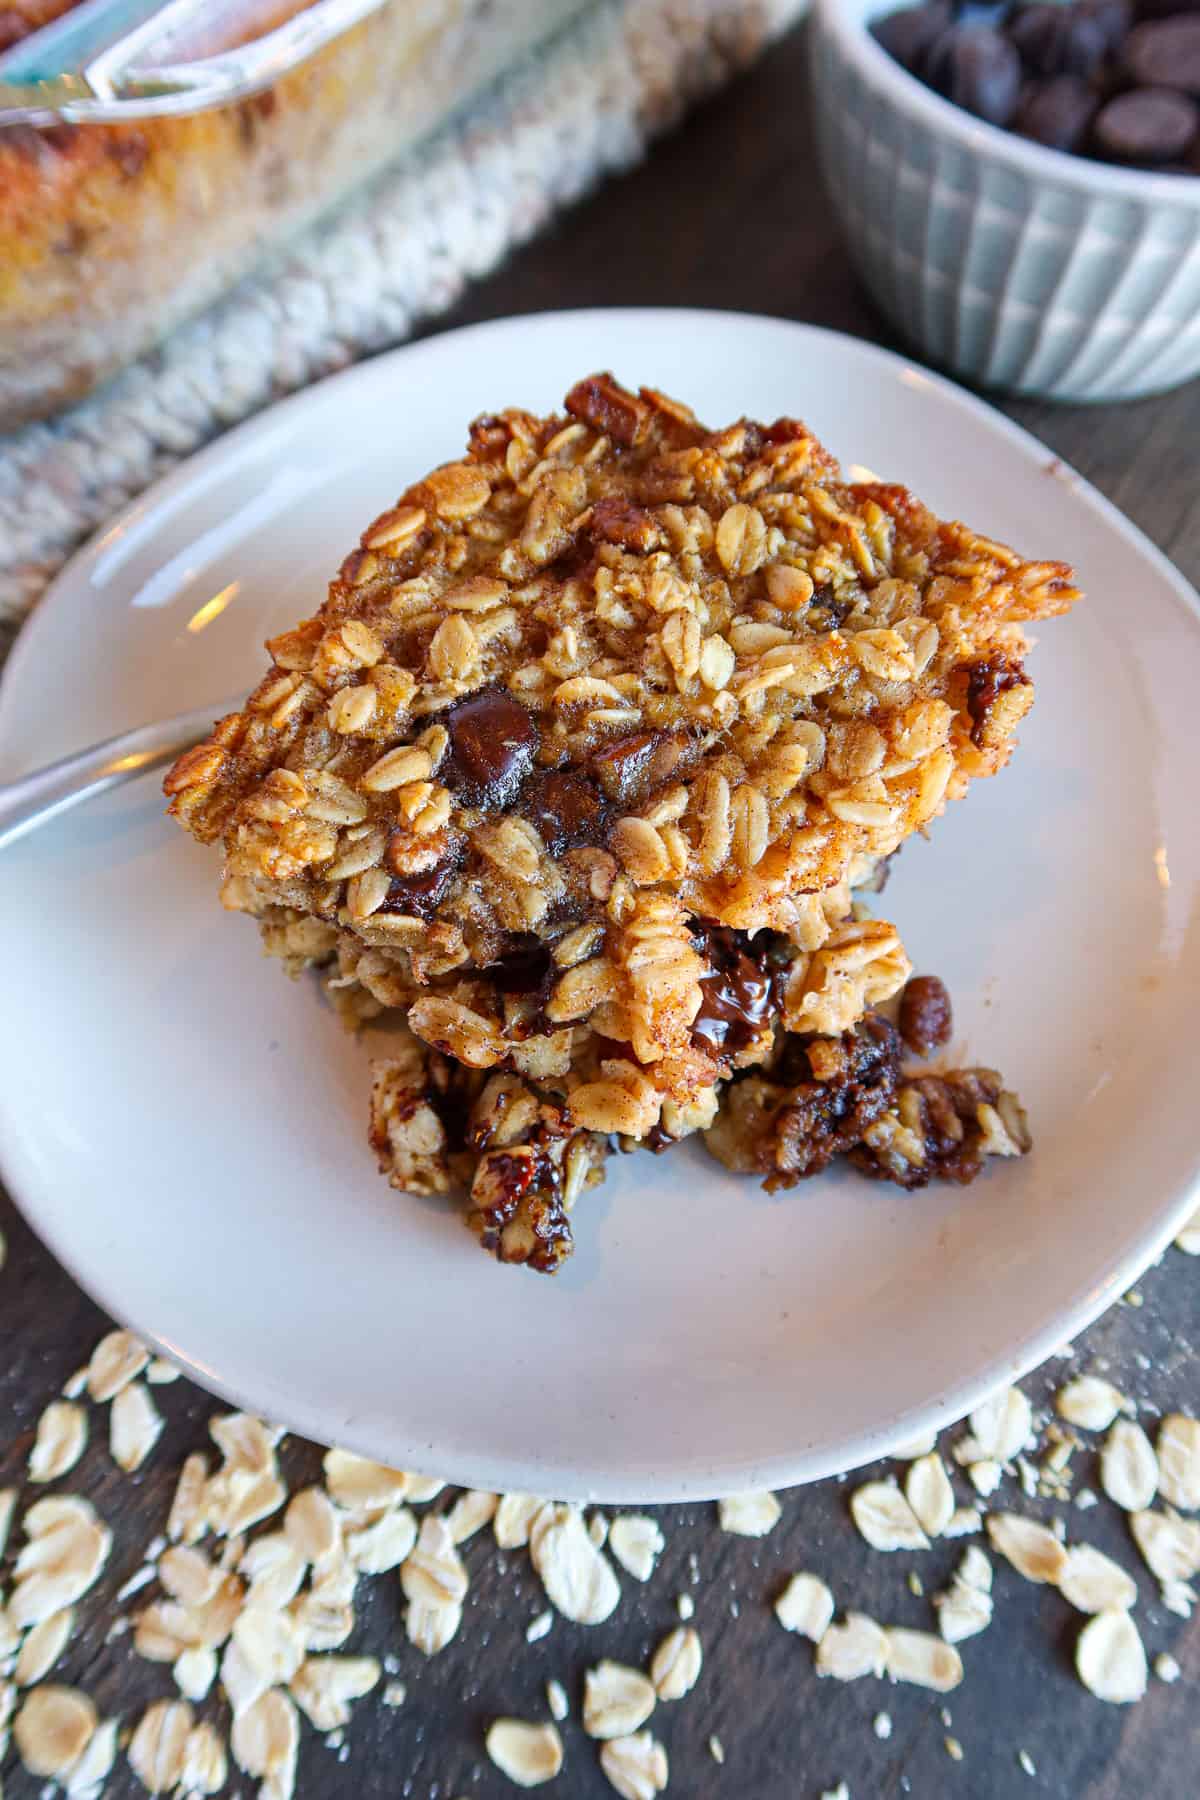 A piece of chocolate chip baked oatmeal on a small, white plate.